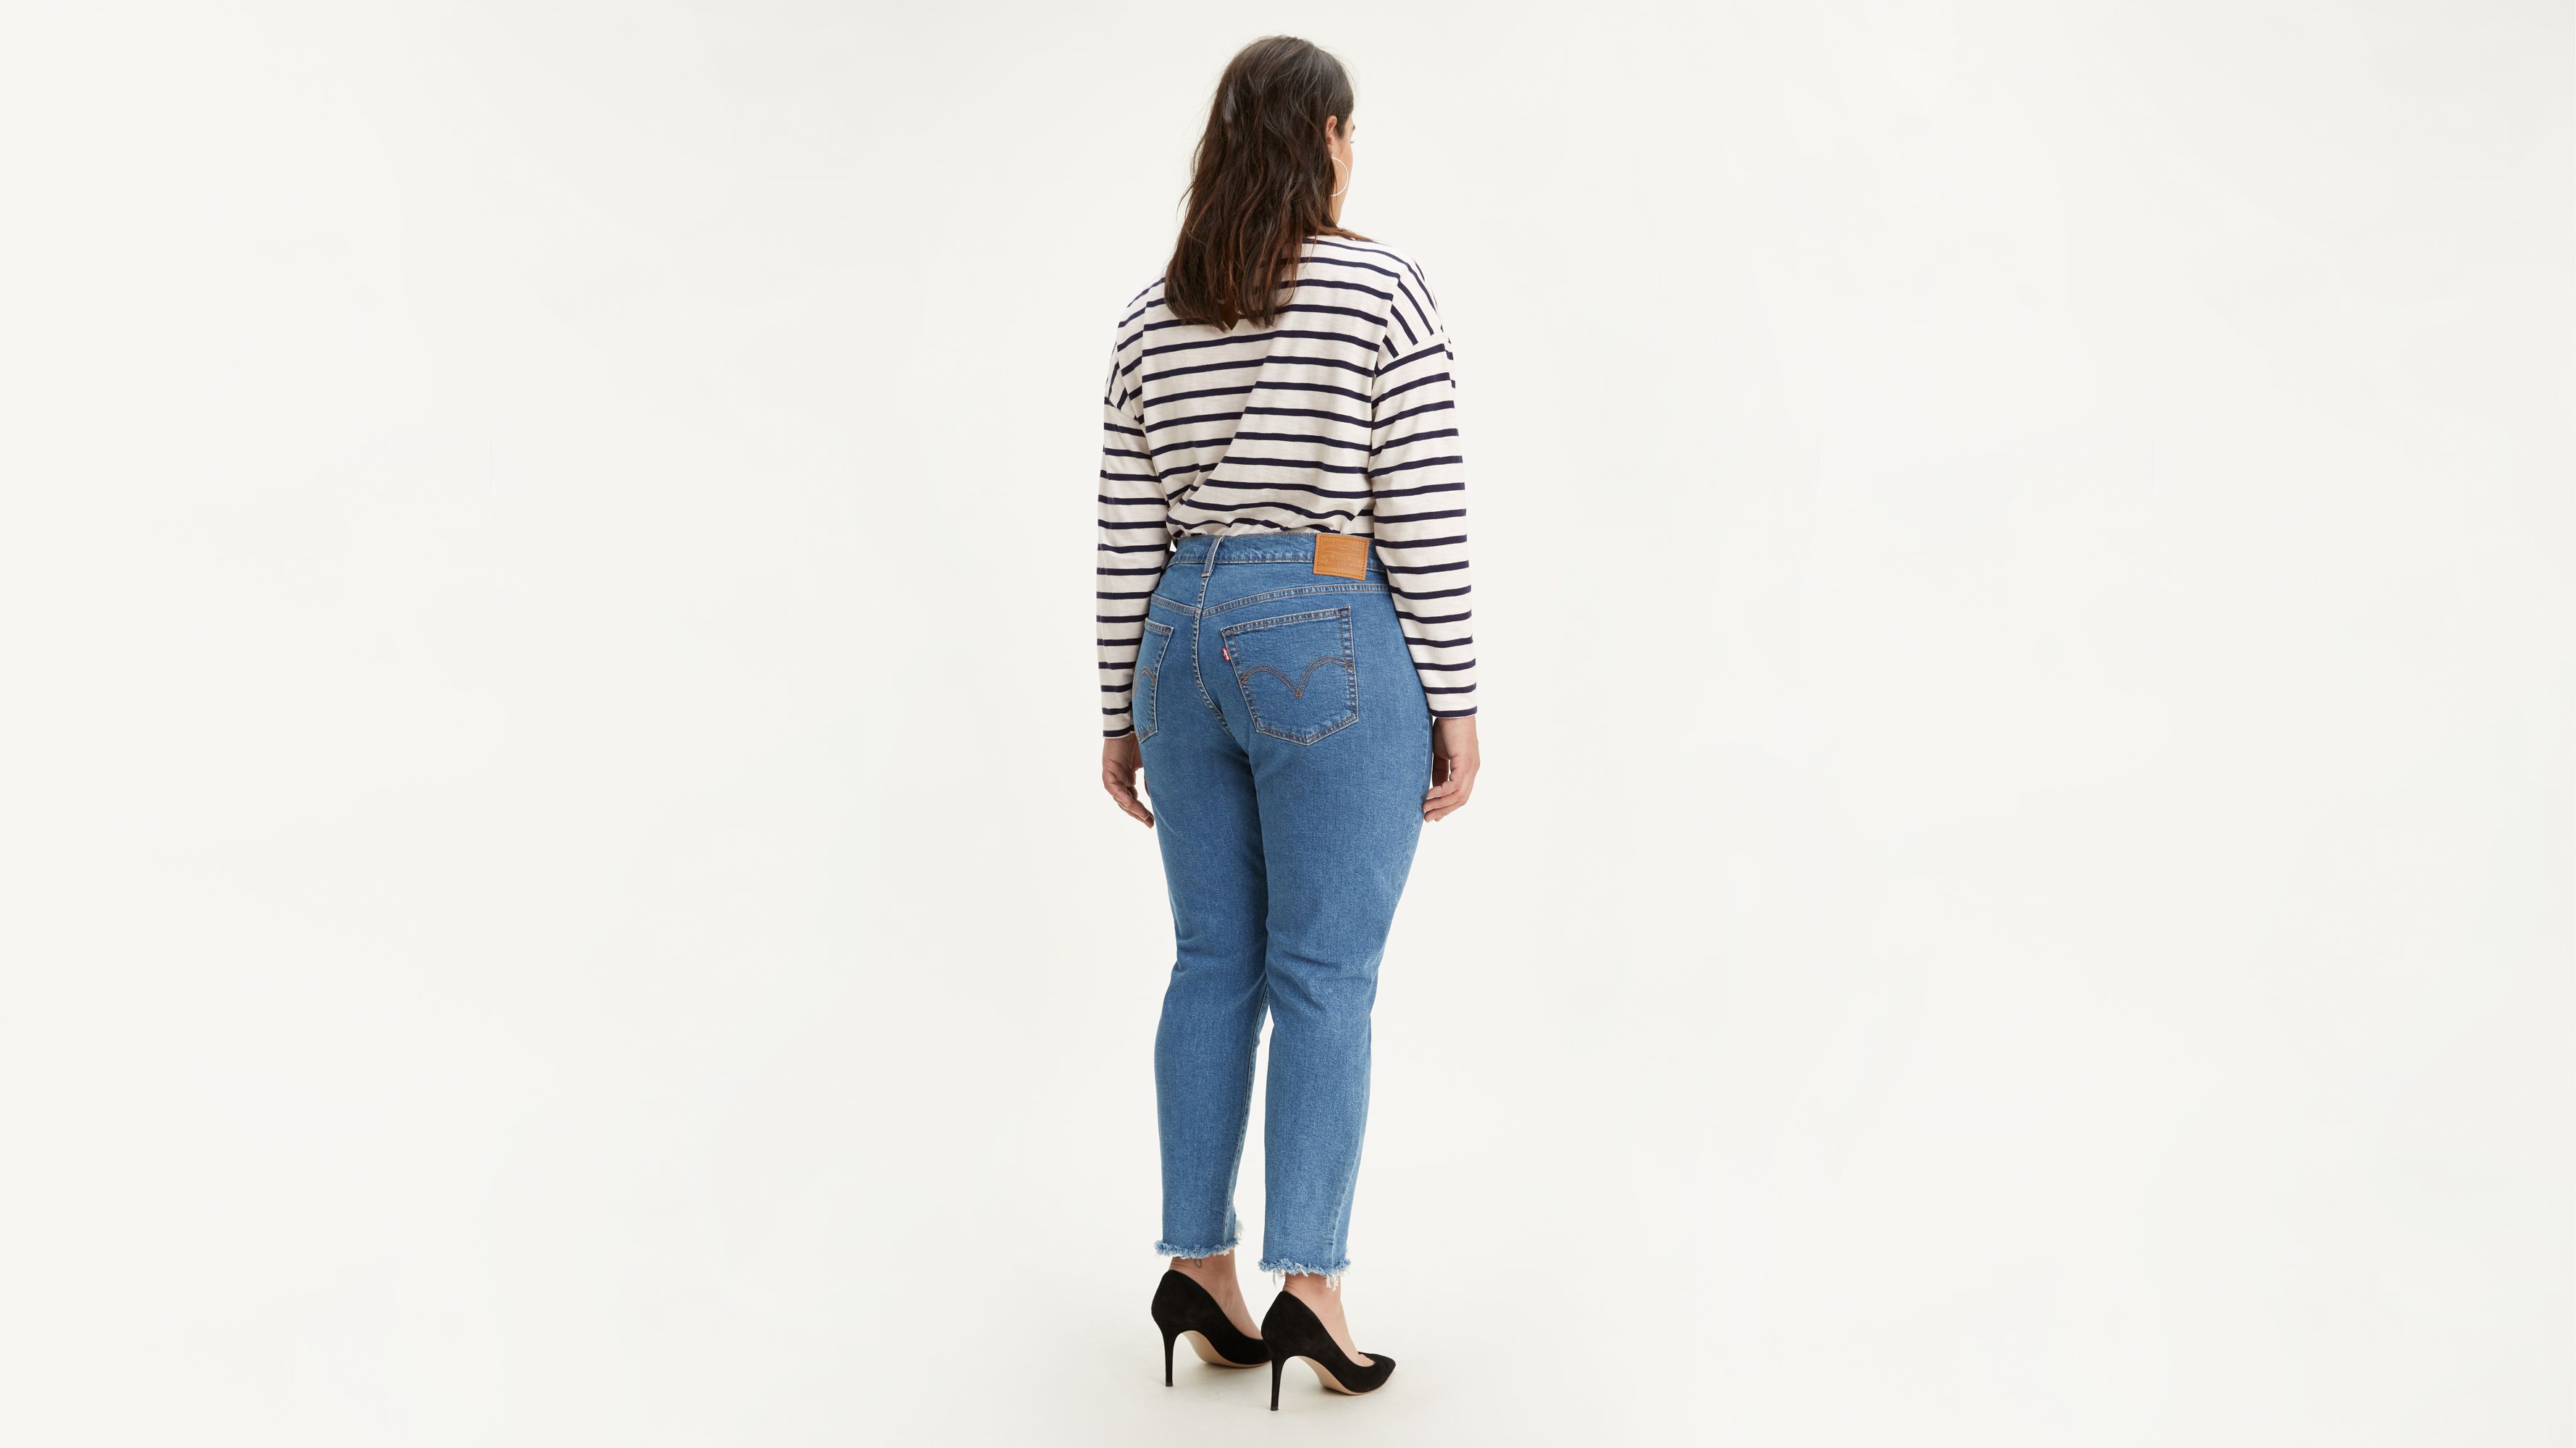 levis wedgie fit skinny jeans